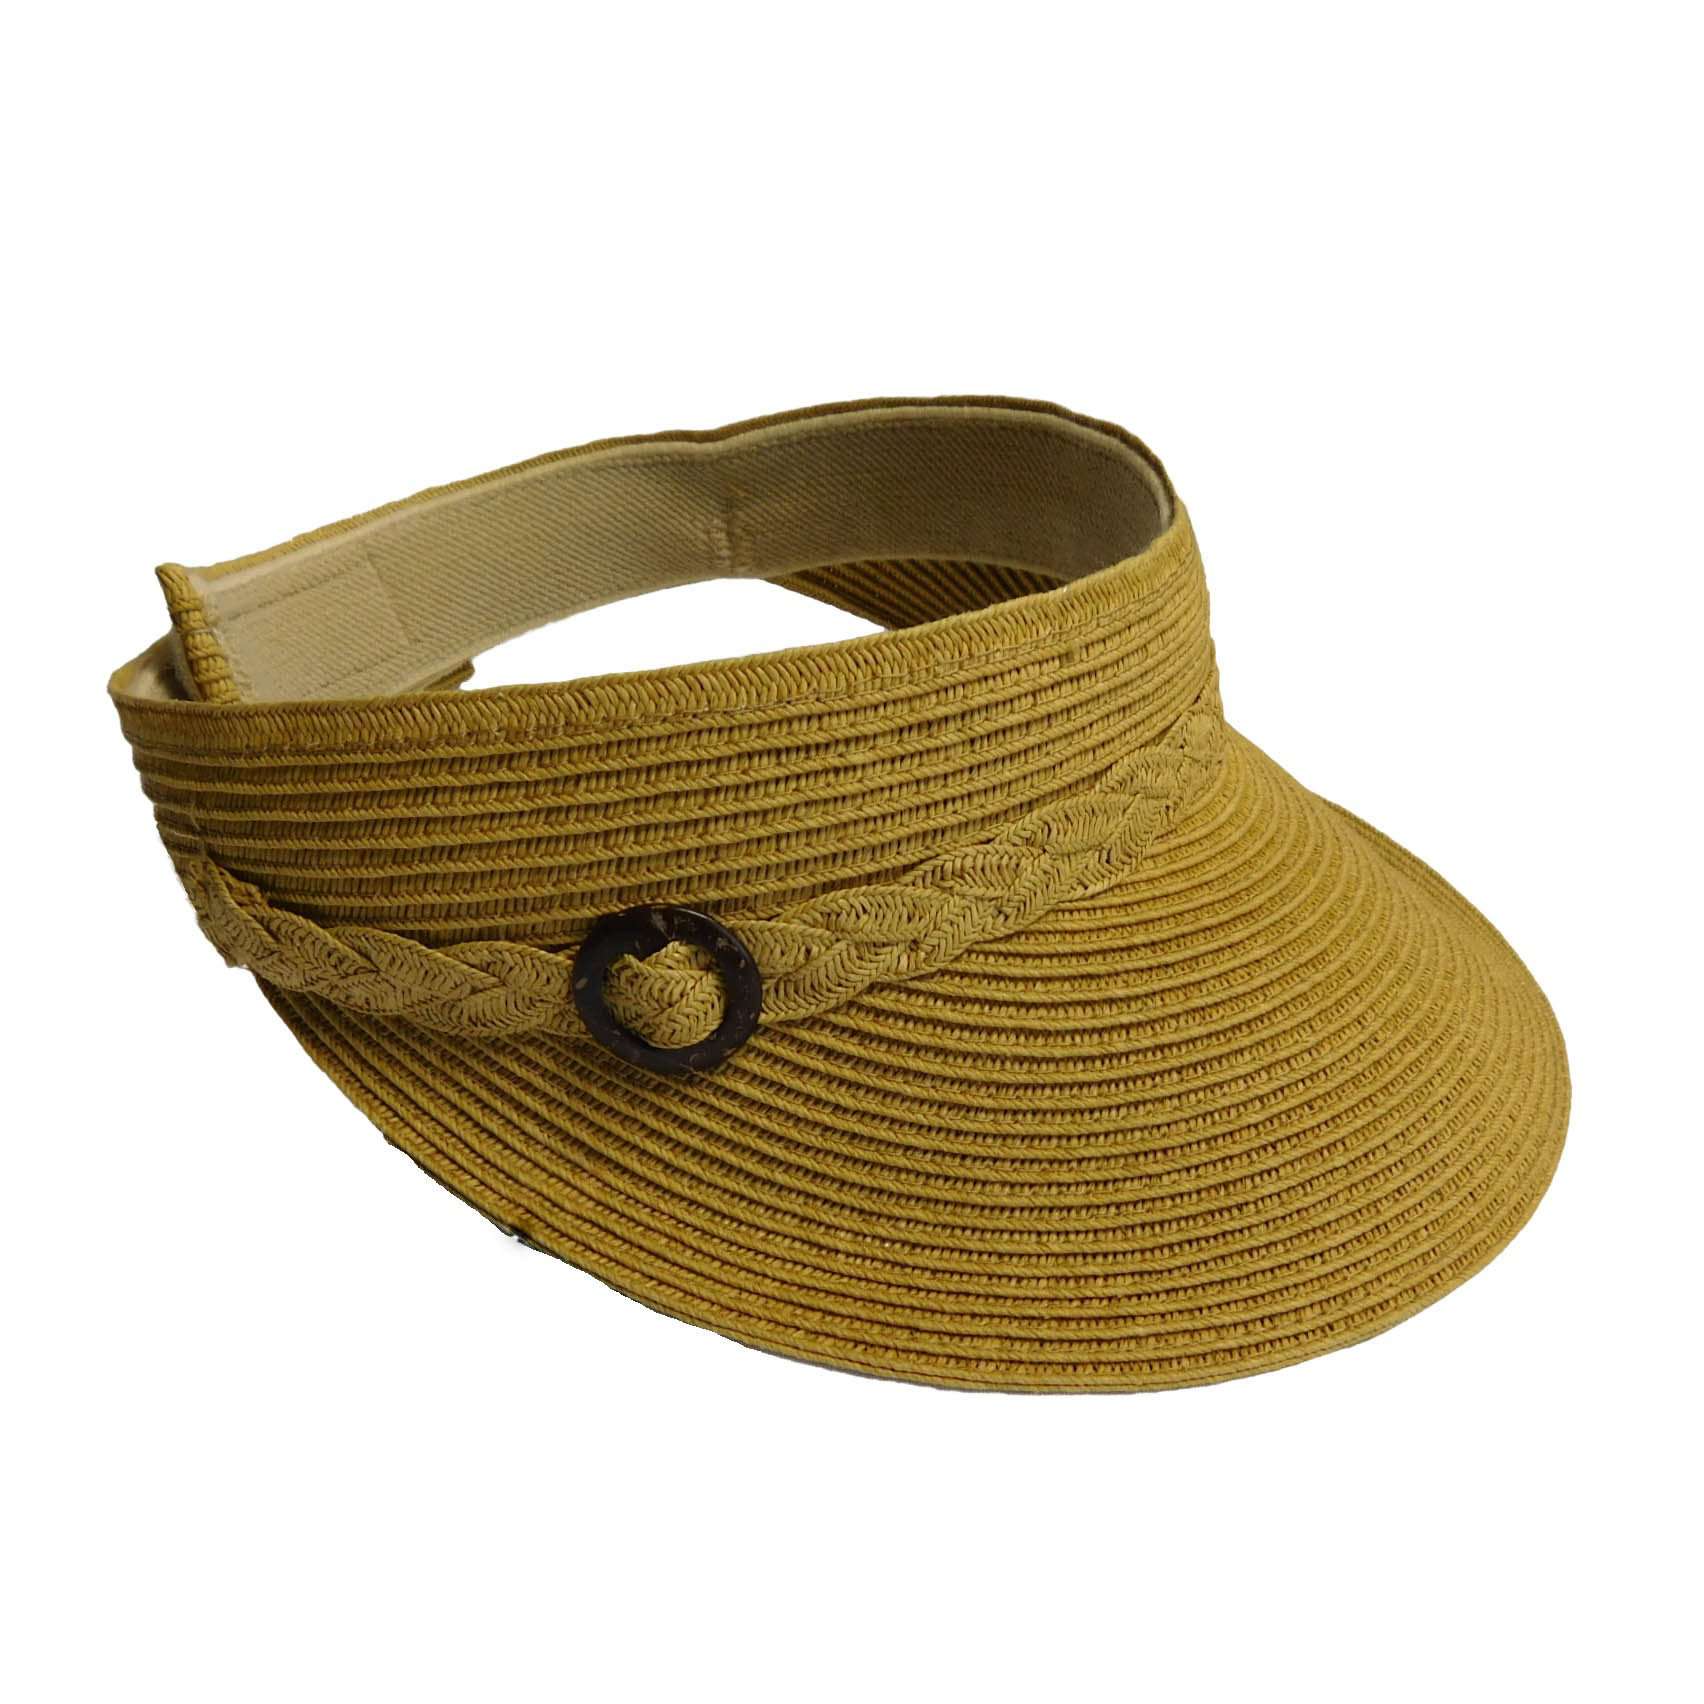 Straw Visor with Buckle Accent Visor Cap Boardwalk Style Hats WSPS656NT Natural  